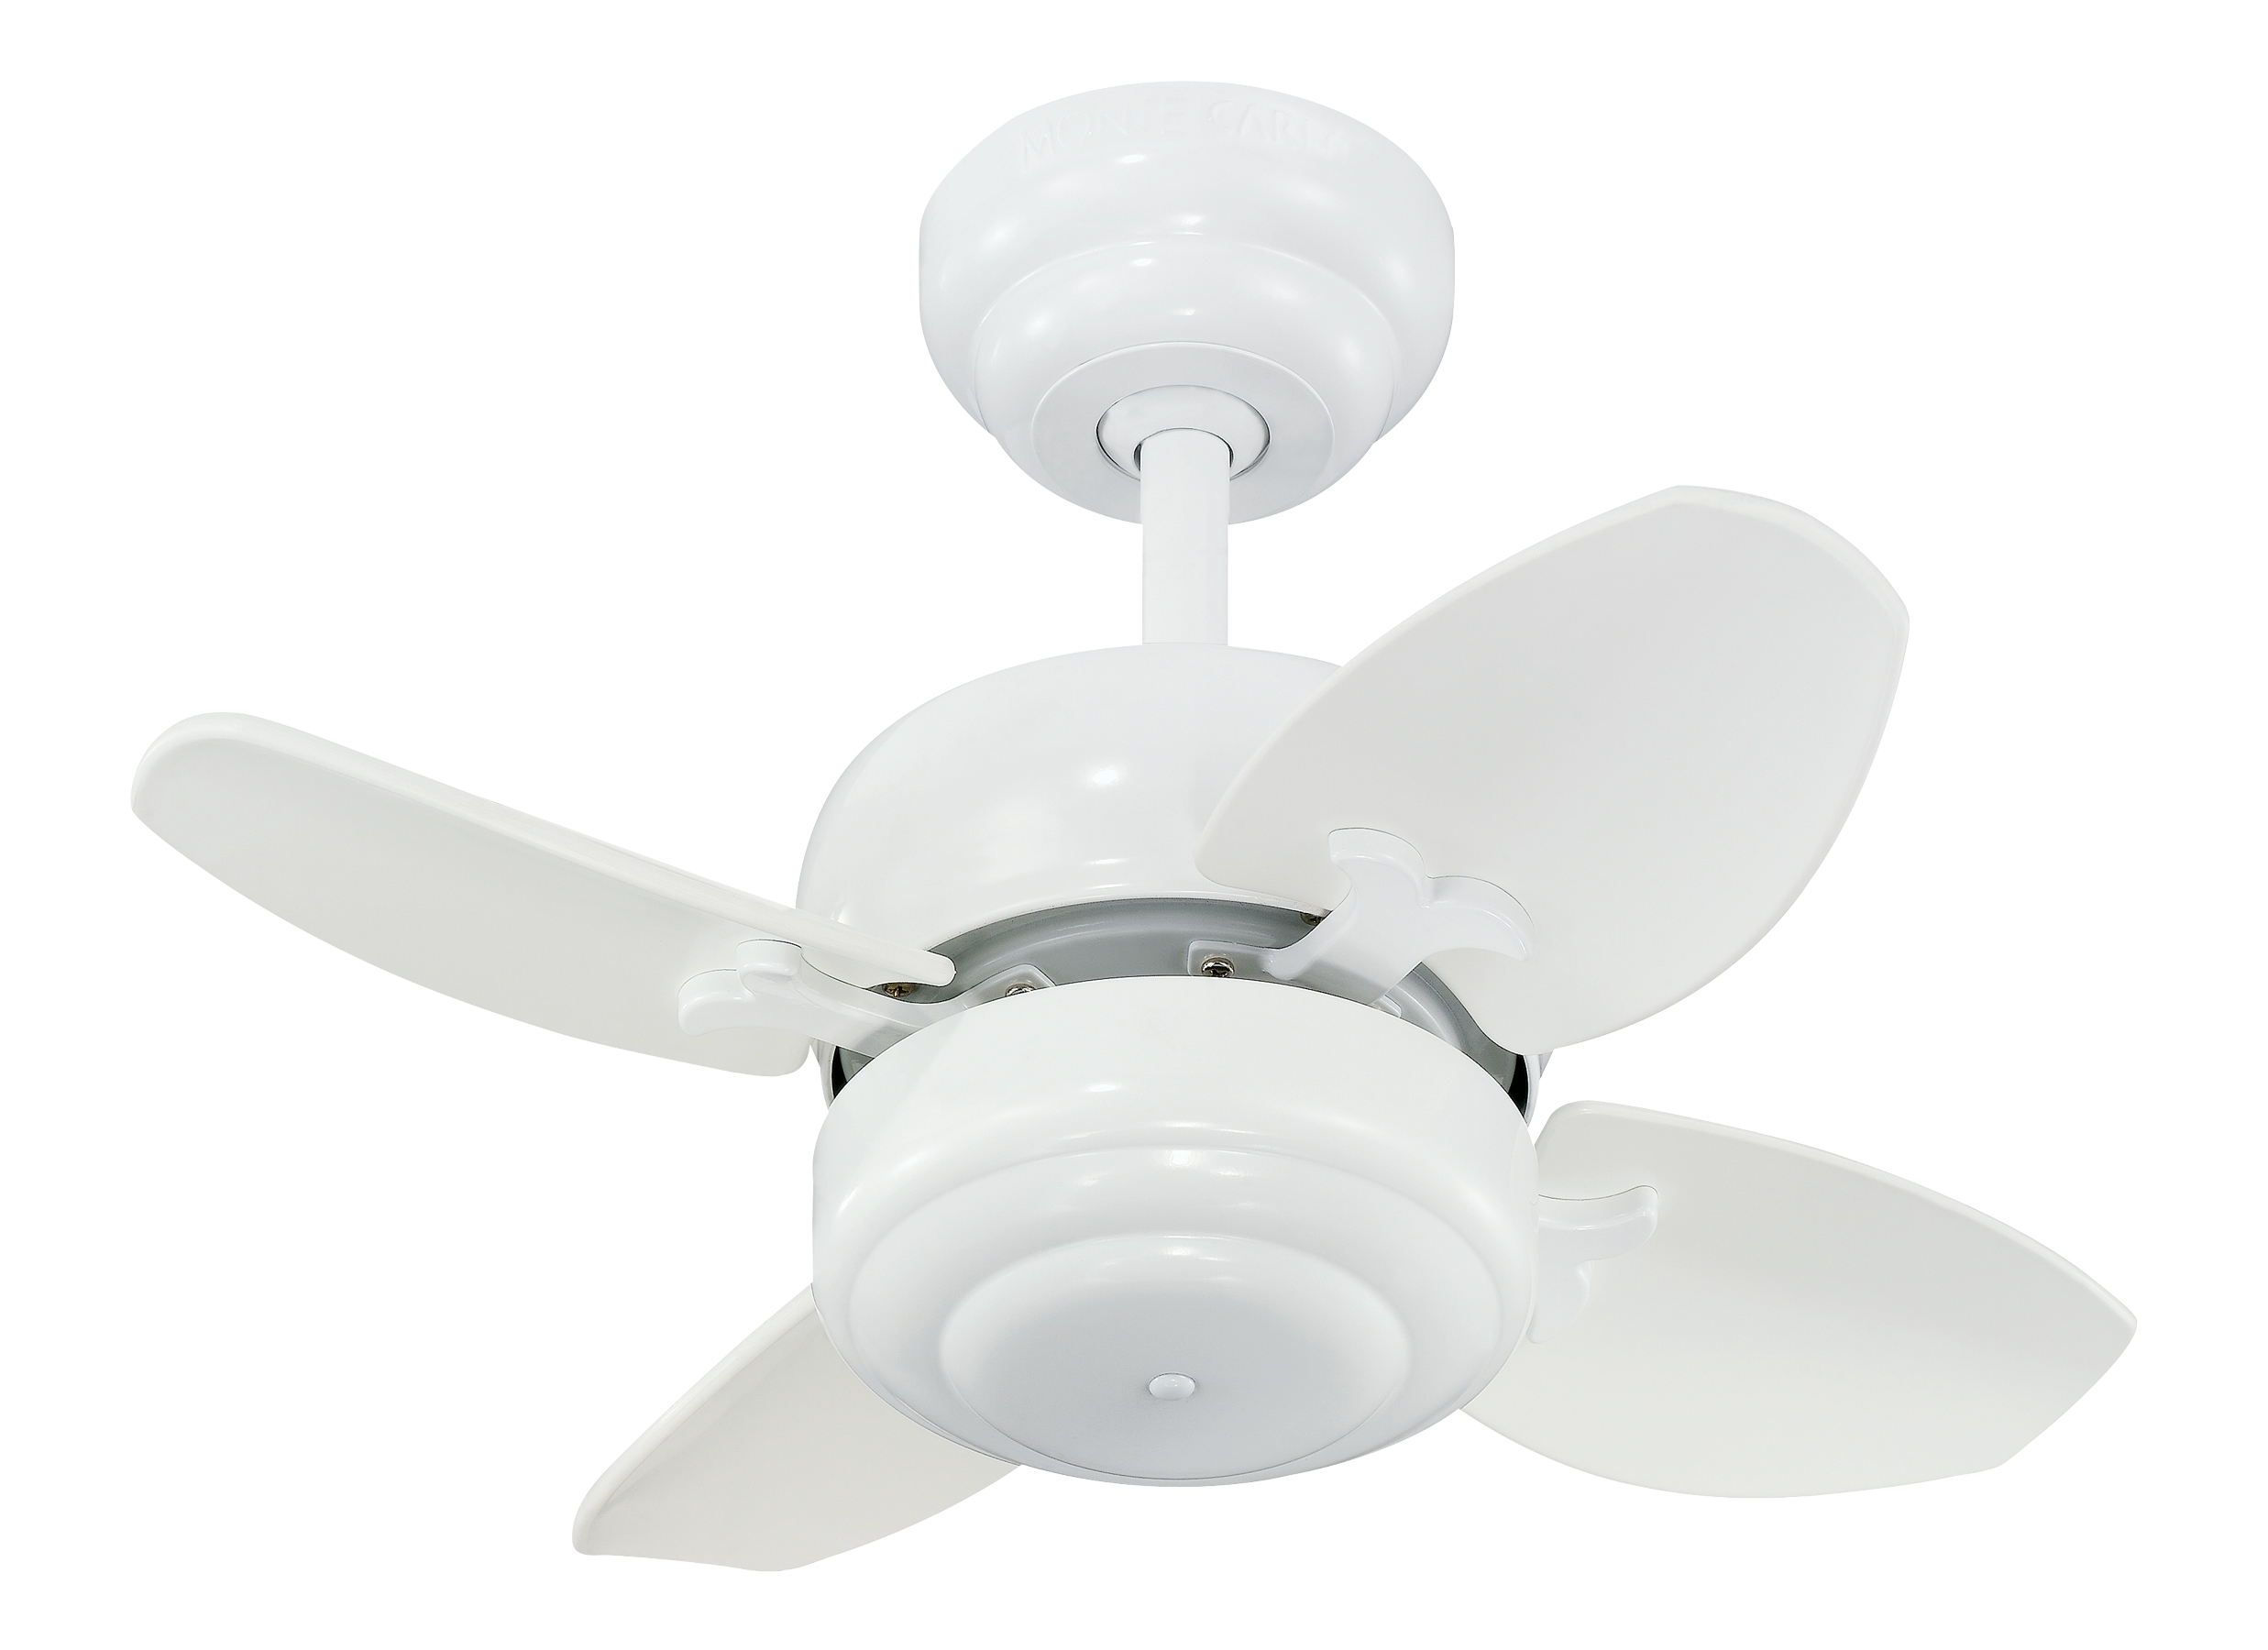 Small Ceiling Fans With Light Flush Mount2474 X 1800